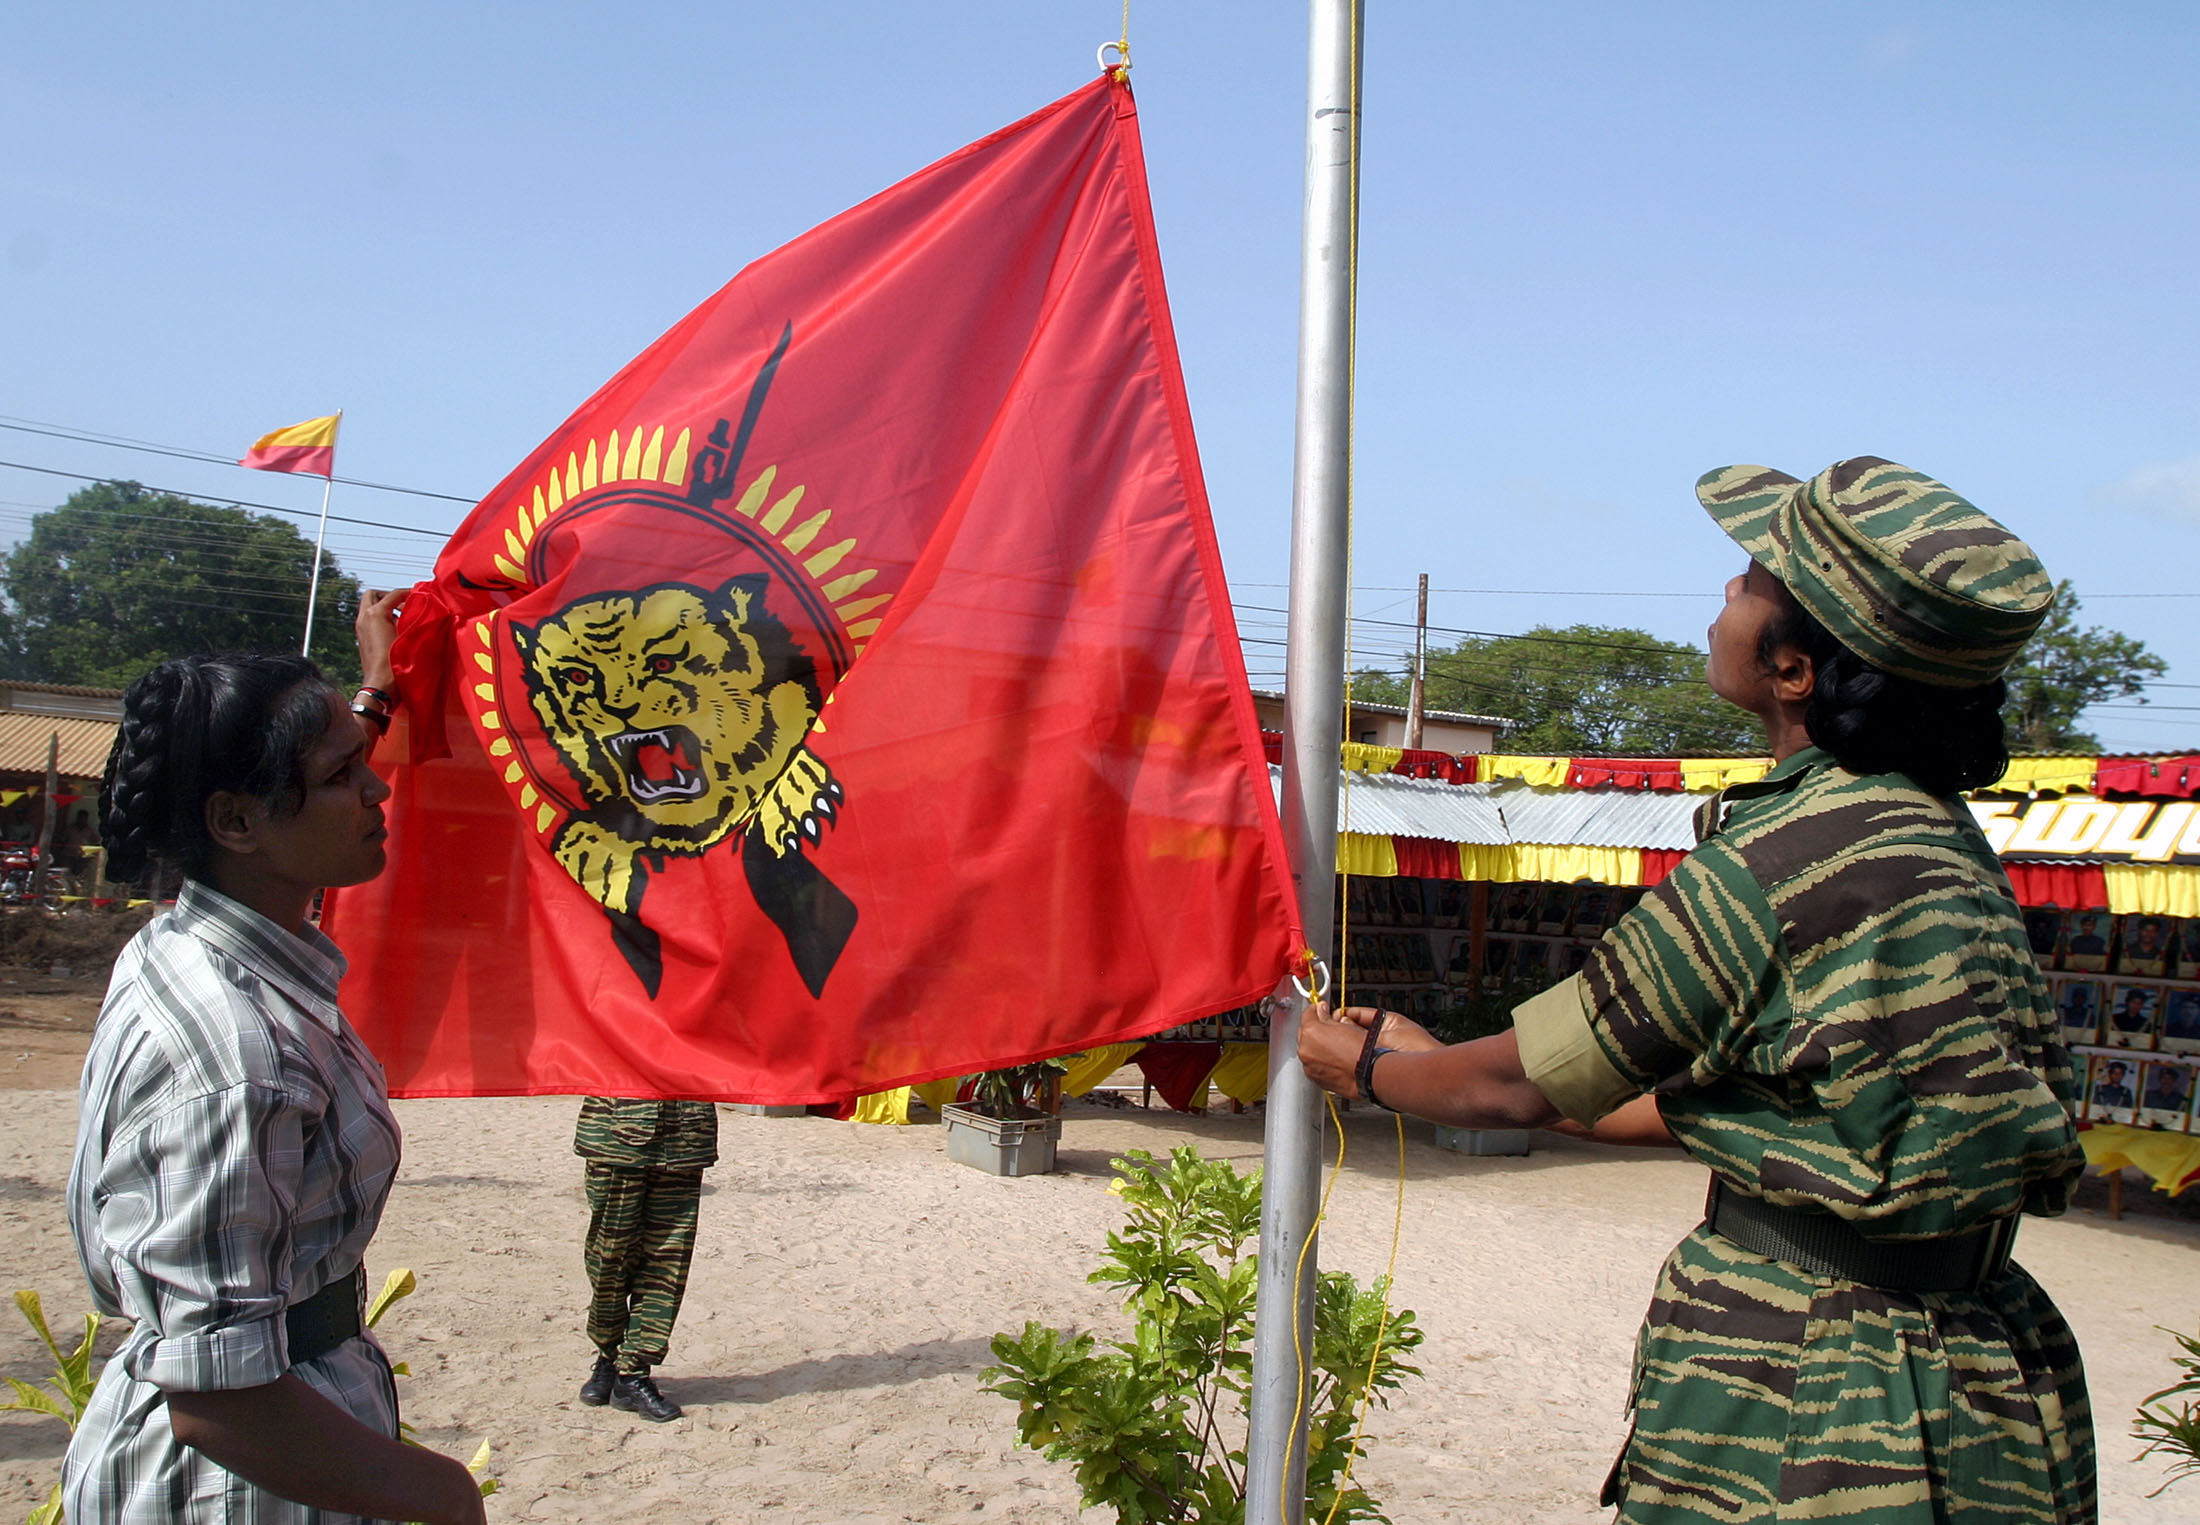 LTTE rebels raise their flag at a Black Tigers Day ceremony in the rebel-held northern Sri Lankan town of Kilinochchi, on July 5, 2004. Source: Anuruddha Lokuhapuarchchi/Reuters.